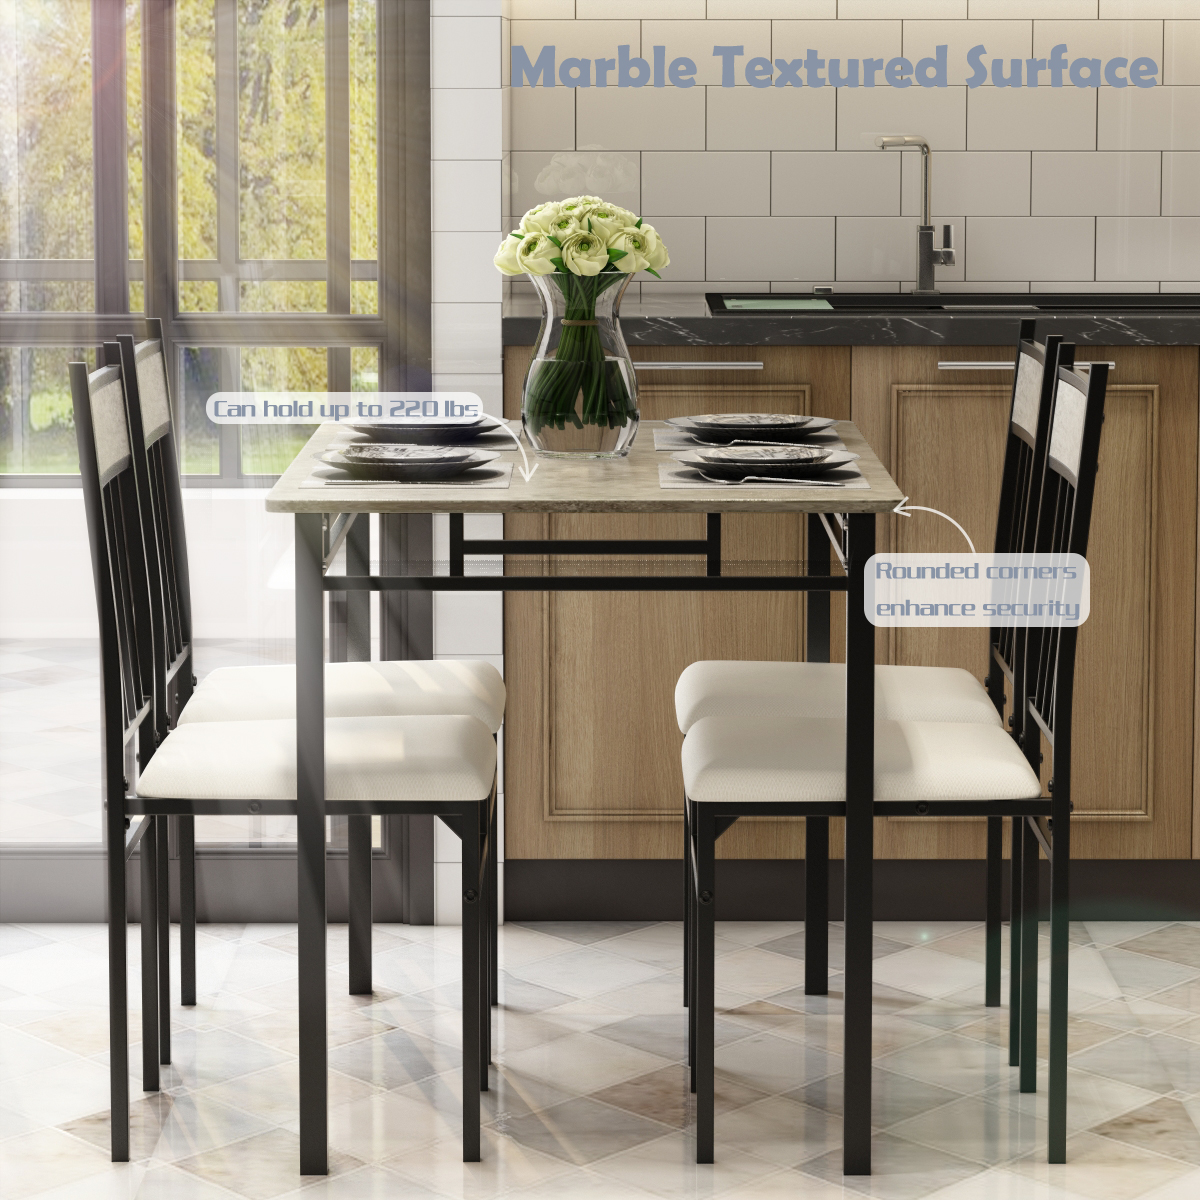 Costway 5 Piece Faux Marble Dining Set Table and 4 Chairs Kitchen Breakfast Furniture Grey - image 4 of 7